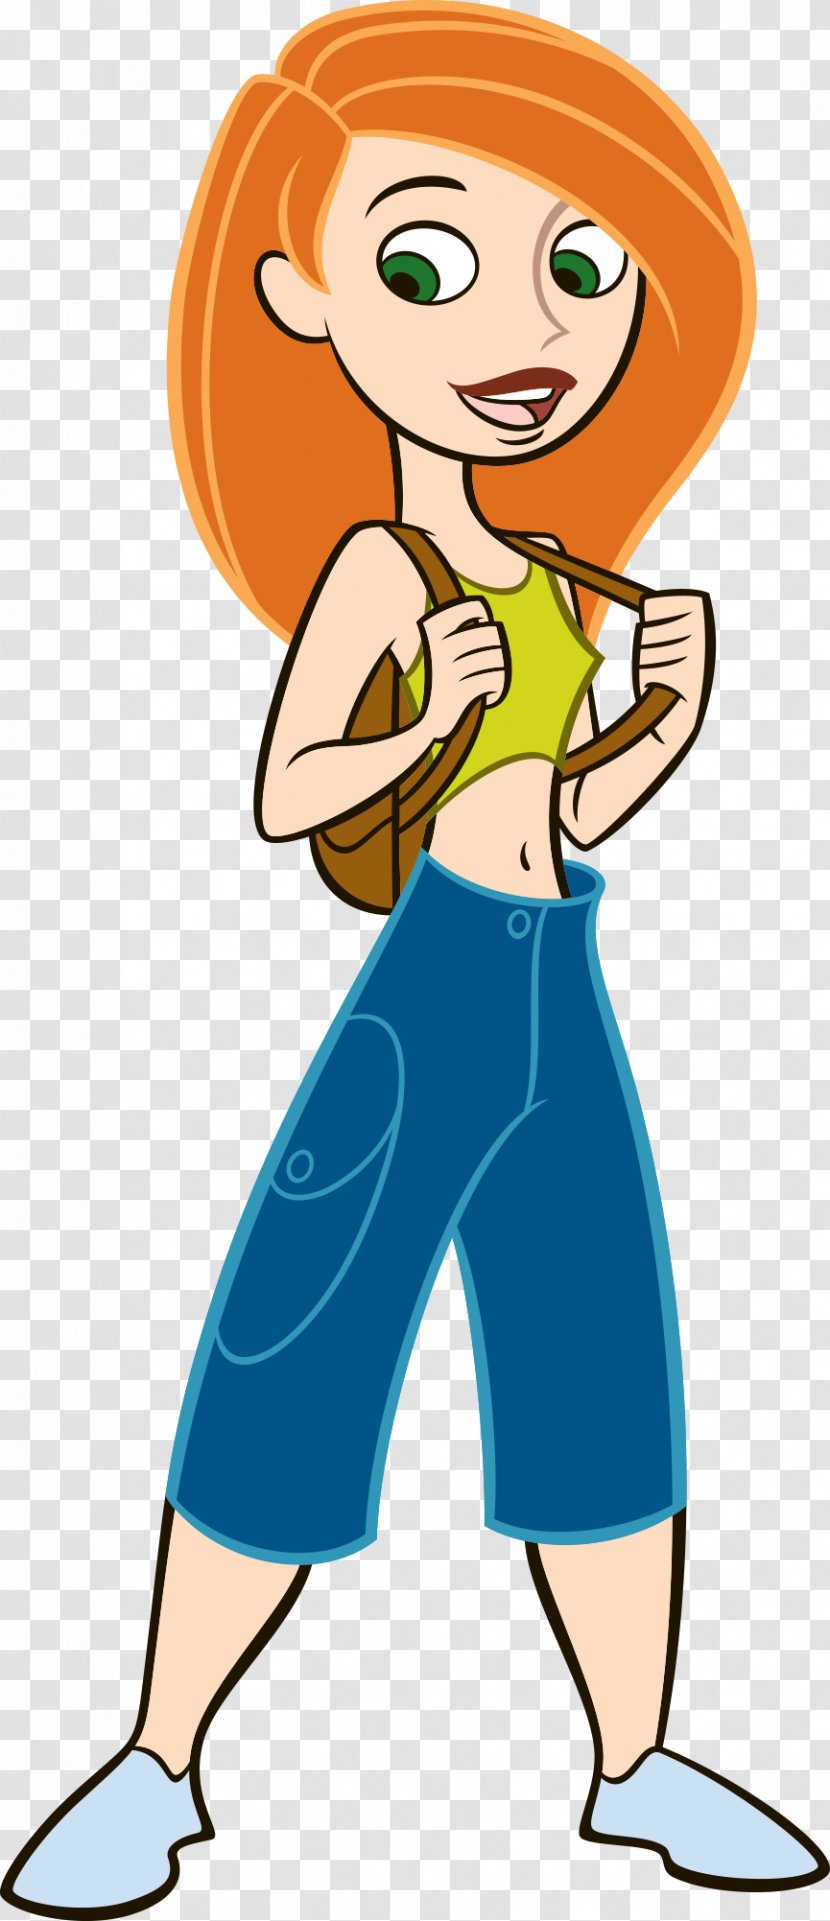 Kim Possible Ron Stoppable Shego Dr. Drakken Disney Channel - Watercolor - Cartoon Characters Transparent PNG